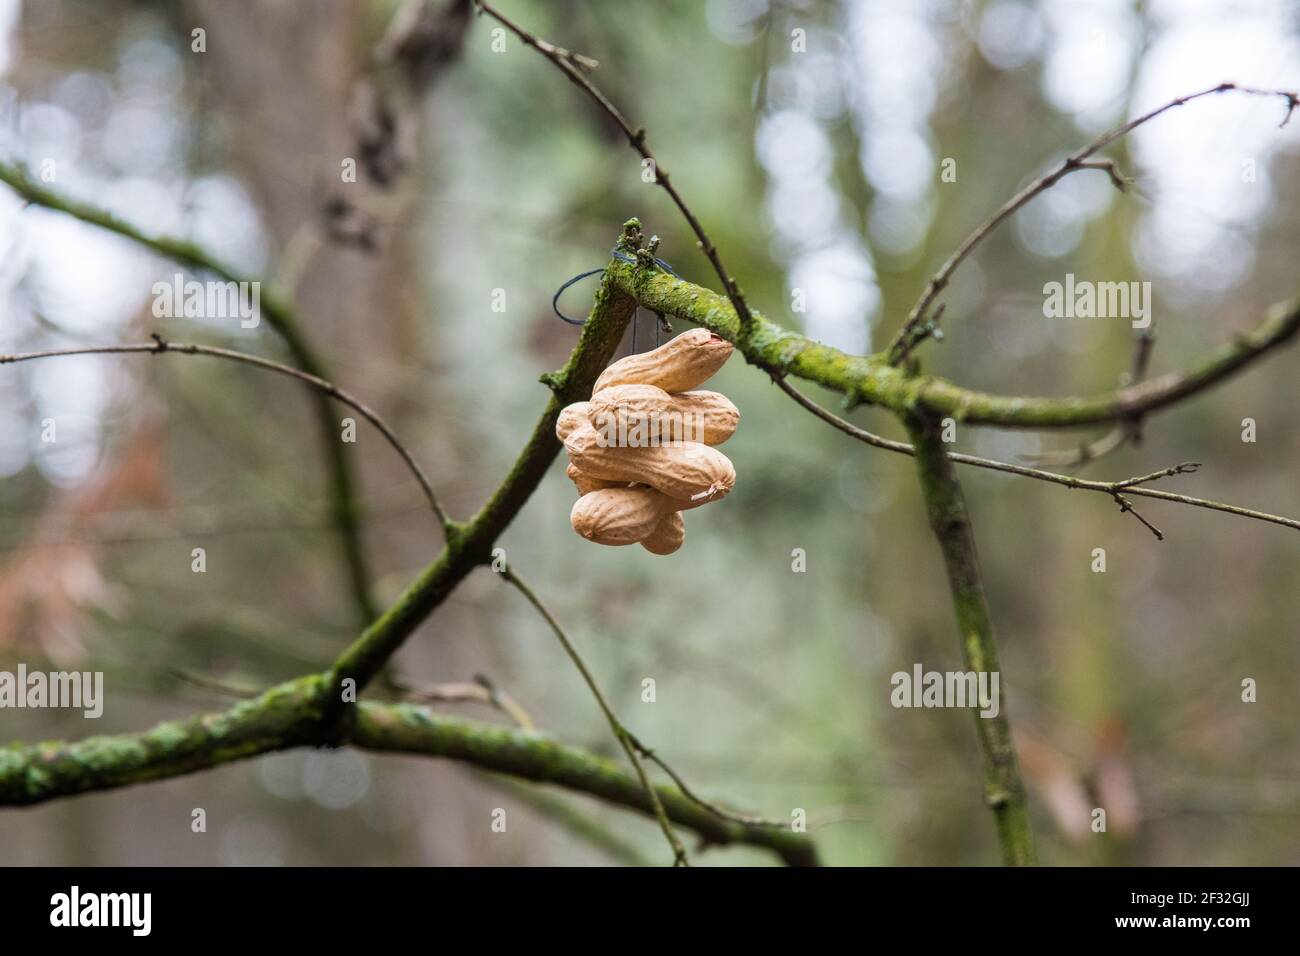 peanuts haning on a branch serving as a feeding spot for birds Stock Photo